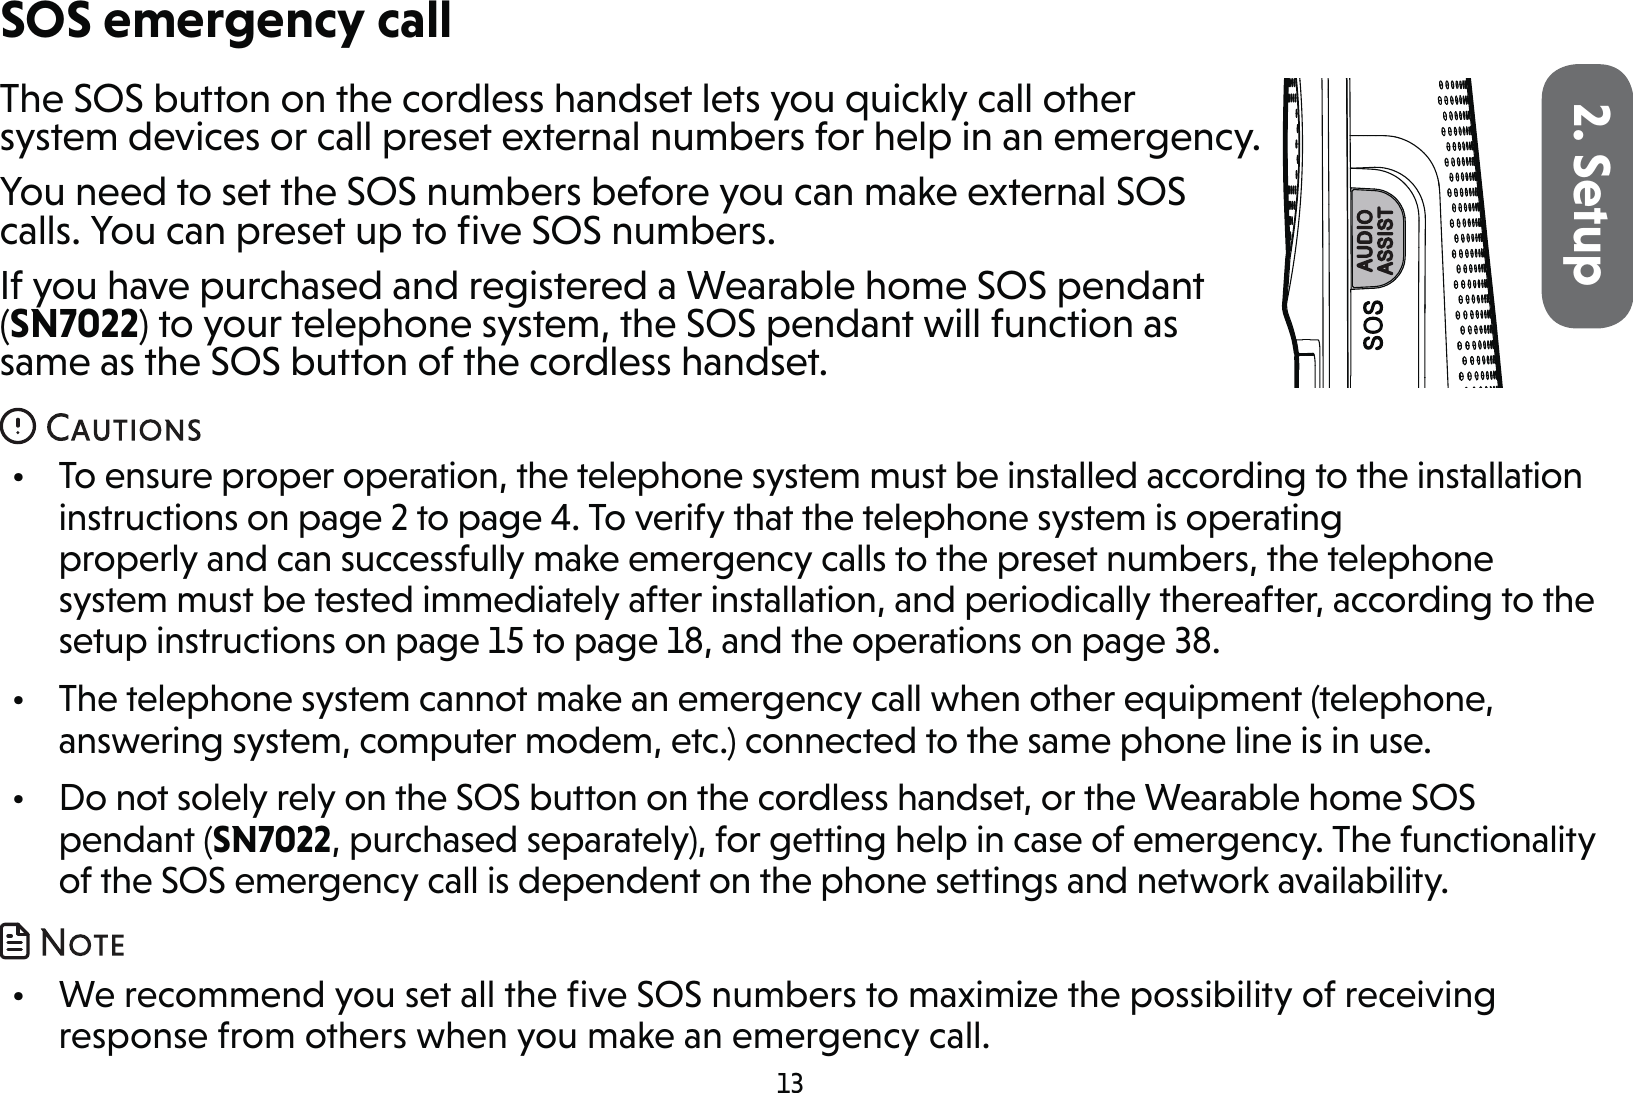 132. SetupThe SOS button on the cordless handset lets you quickly call other system devices or call preset external numbers for help in an emergency.You need to set the SOS numbers before you can make external SOS calls. You can preset up to ﬁve SOS numbers.If you have purchased and registered a Wearable home SOS pendant (SN7022) to your telephone system, the SOS pendant will function as same as the SOS button of the cordless handset.•  To ensure proper operation, the telephone system must be installed according to the installation instructions on page 2 to page 4. To verify that the telephone system is operating properly and can successfully make emergency calls to the preset numbers, the telephone system must be tested immediately after installation, and periodically thereafter, according to the setup instructions on page 15 to page 18, and the operations on page 38.•  The telephone system cannot make an emergency call when other equipment (telephone, answering system, computer modem, etc.) connected to the same phone line is in use.•  Do not solely rely on the SOS button on the cordless handset, or the Wearable home SOS pendant (SN7022, purchased separately), for getting help in case of emergency. The functionality of the SOS emergency call is dependent on the phone settings and network availability. •  We recommend you set all the ﬁve SOS numbers to maximize the possibility of receiving response from others when you make an emergency call.SOS emergency call